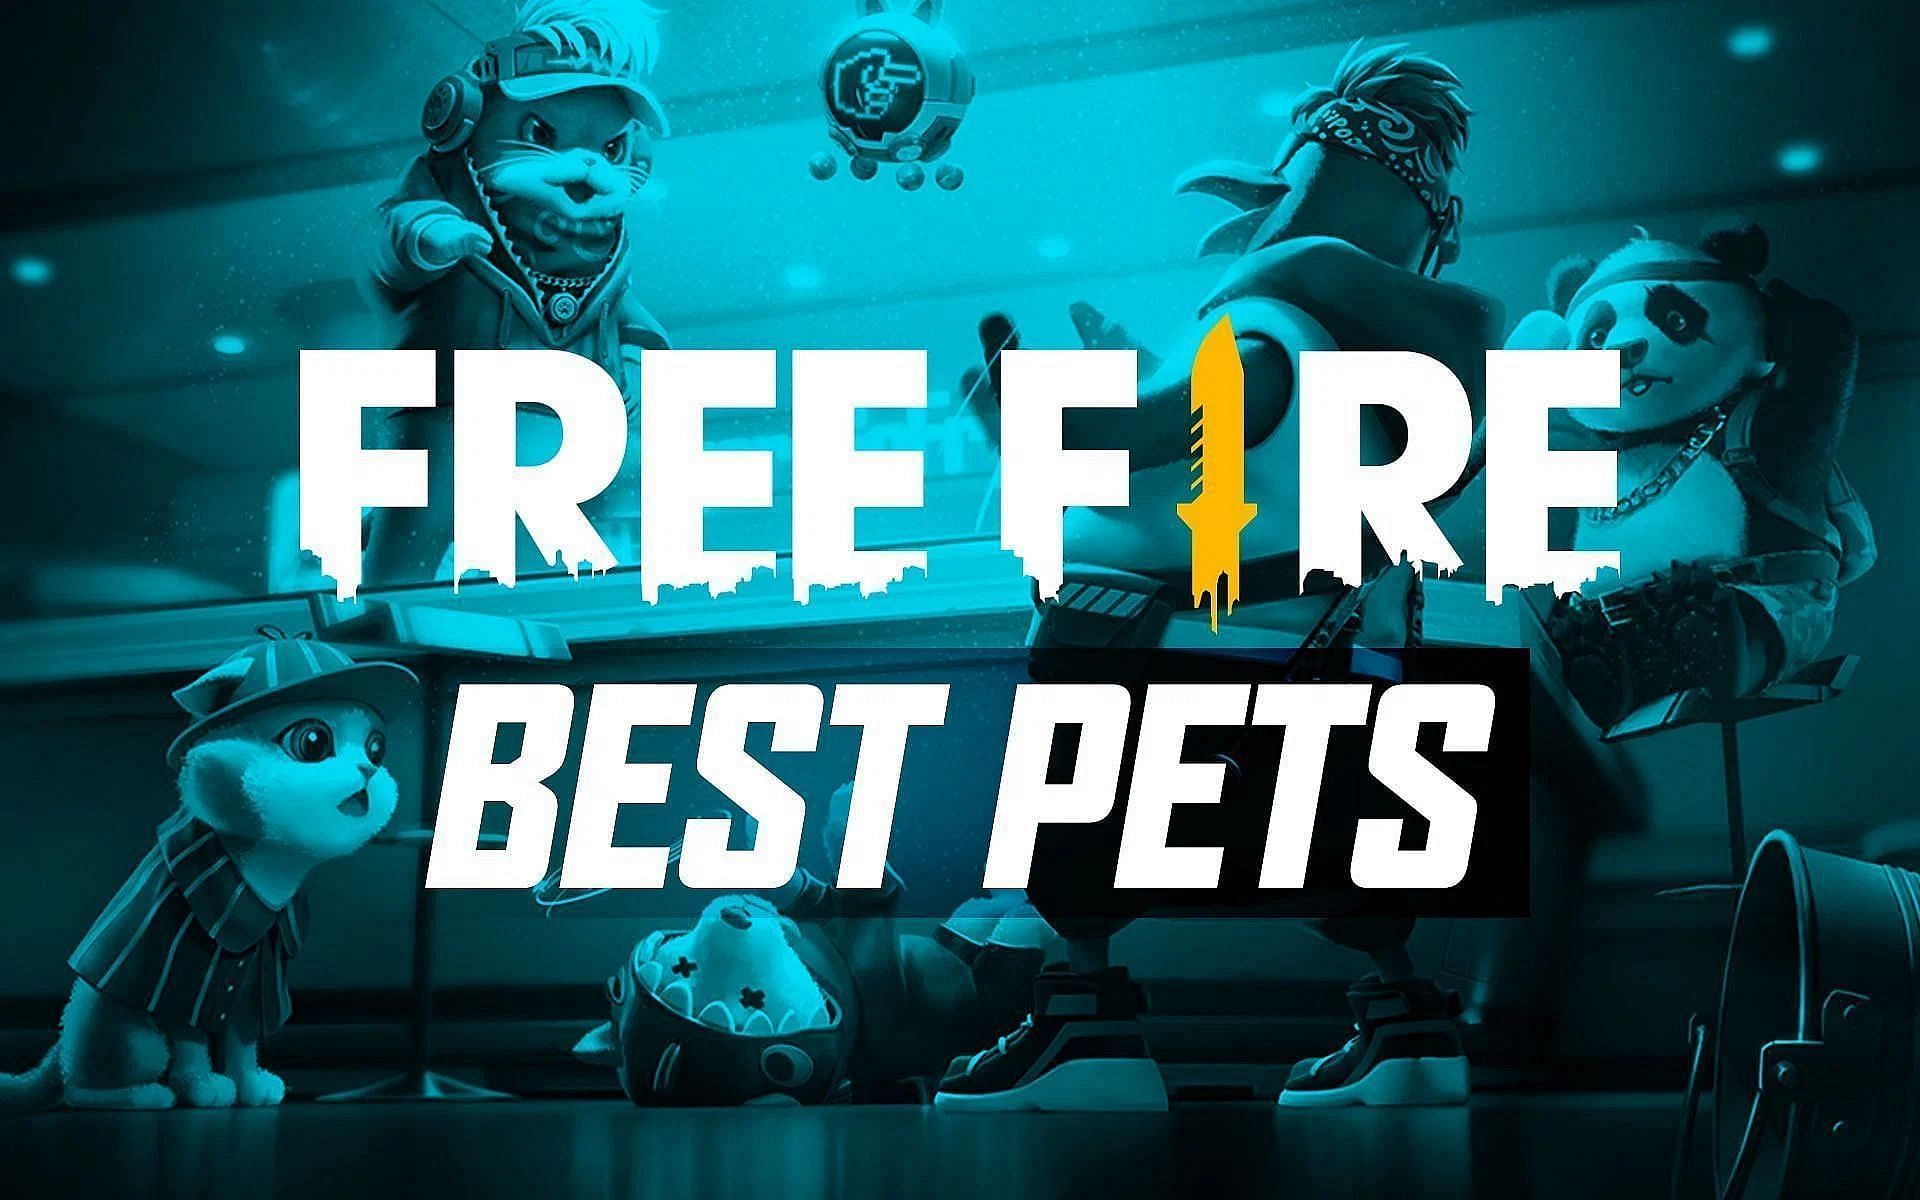 The best pets to accompany the aggressive characters in Free Fire (Image via Sportskeeda)